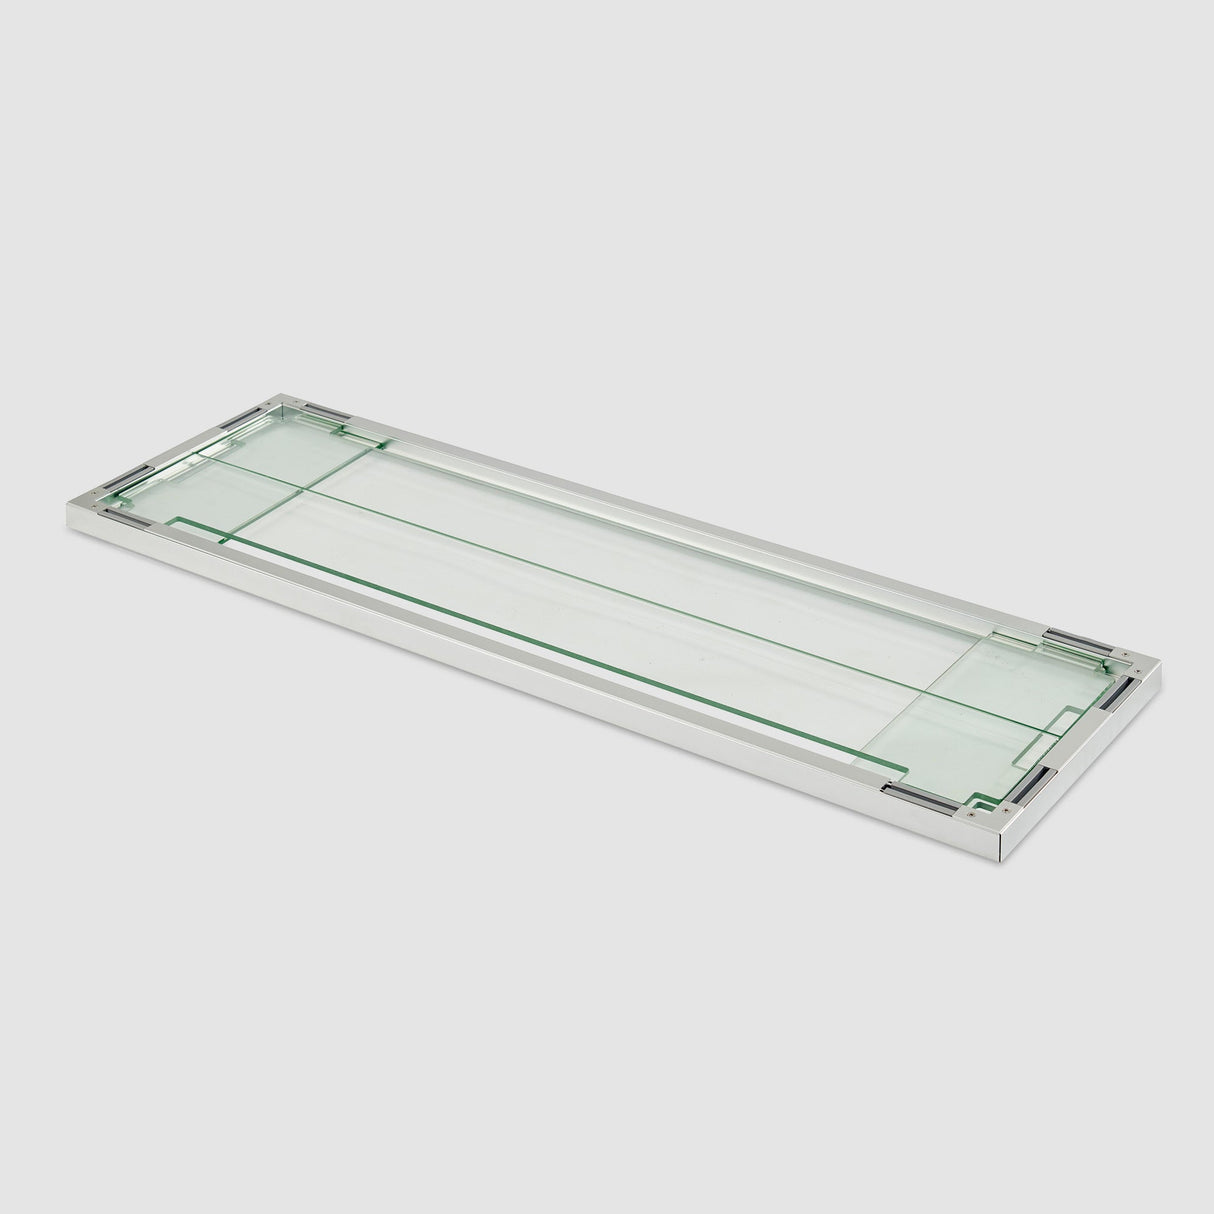 The Rectangular Folding Glass Wind Guard folded down on a grey background